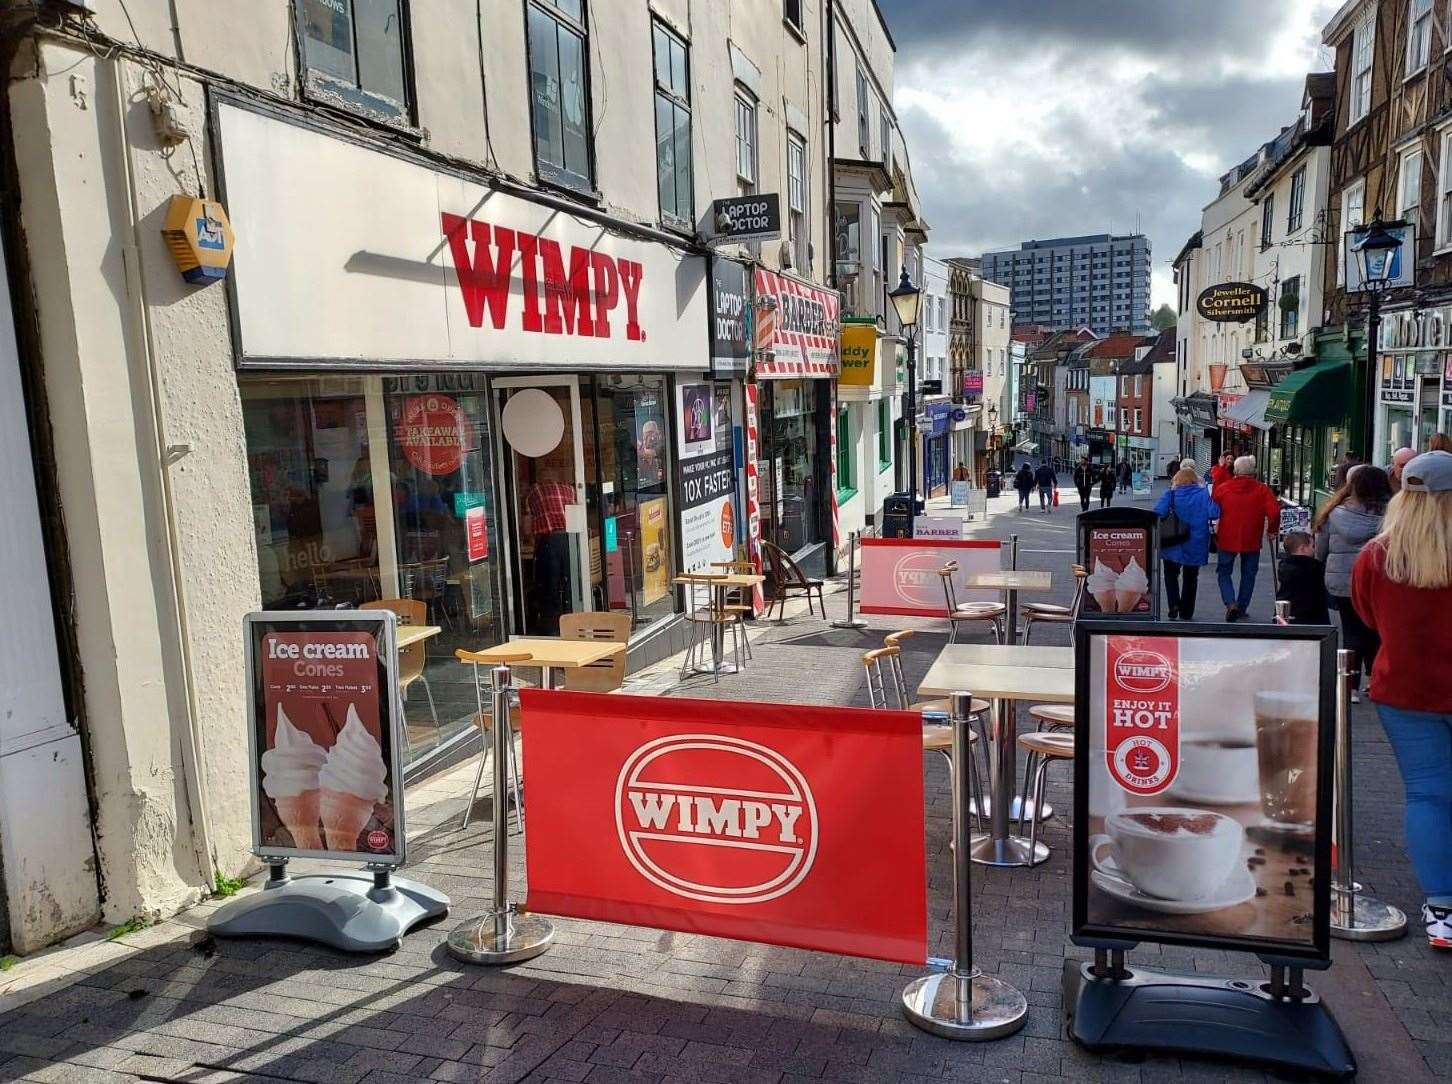 A remarkable 10% of all Wimpy restaurants are in Kent, don't you know